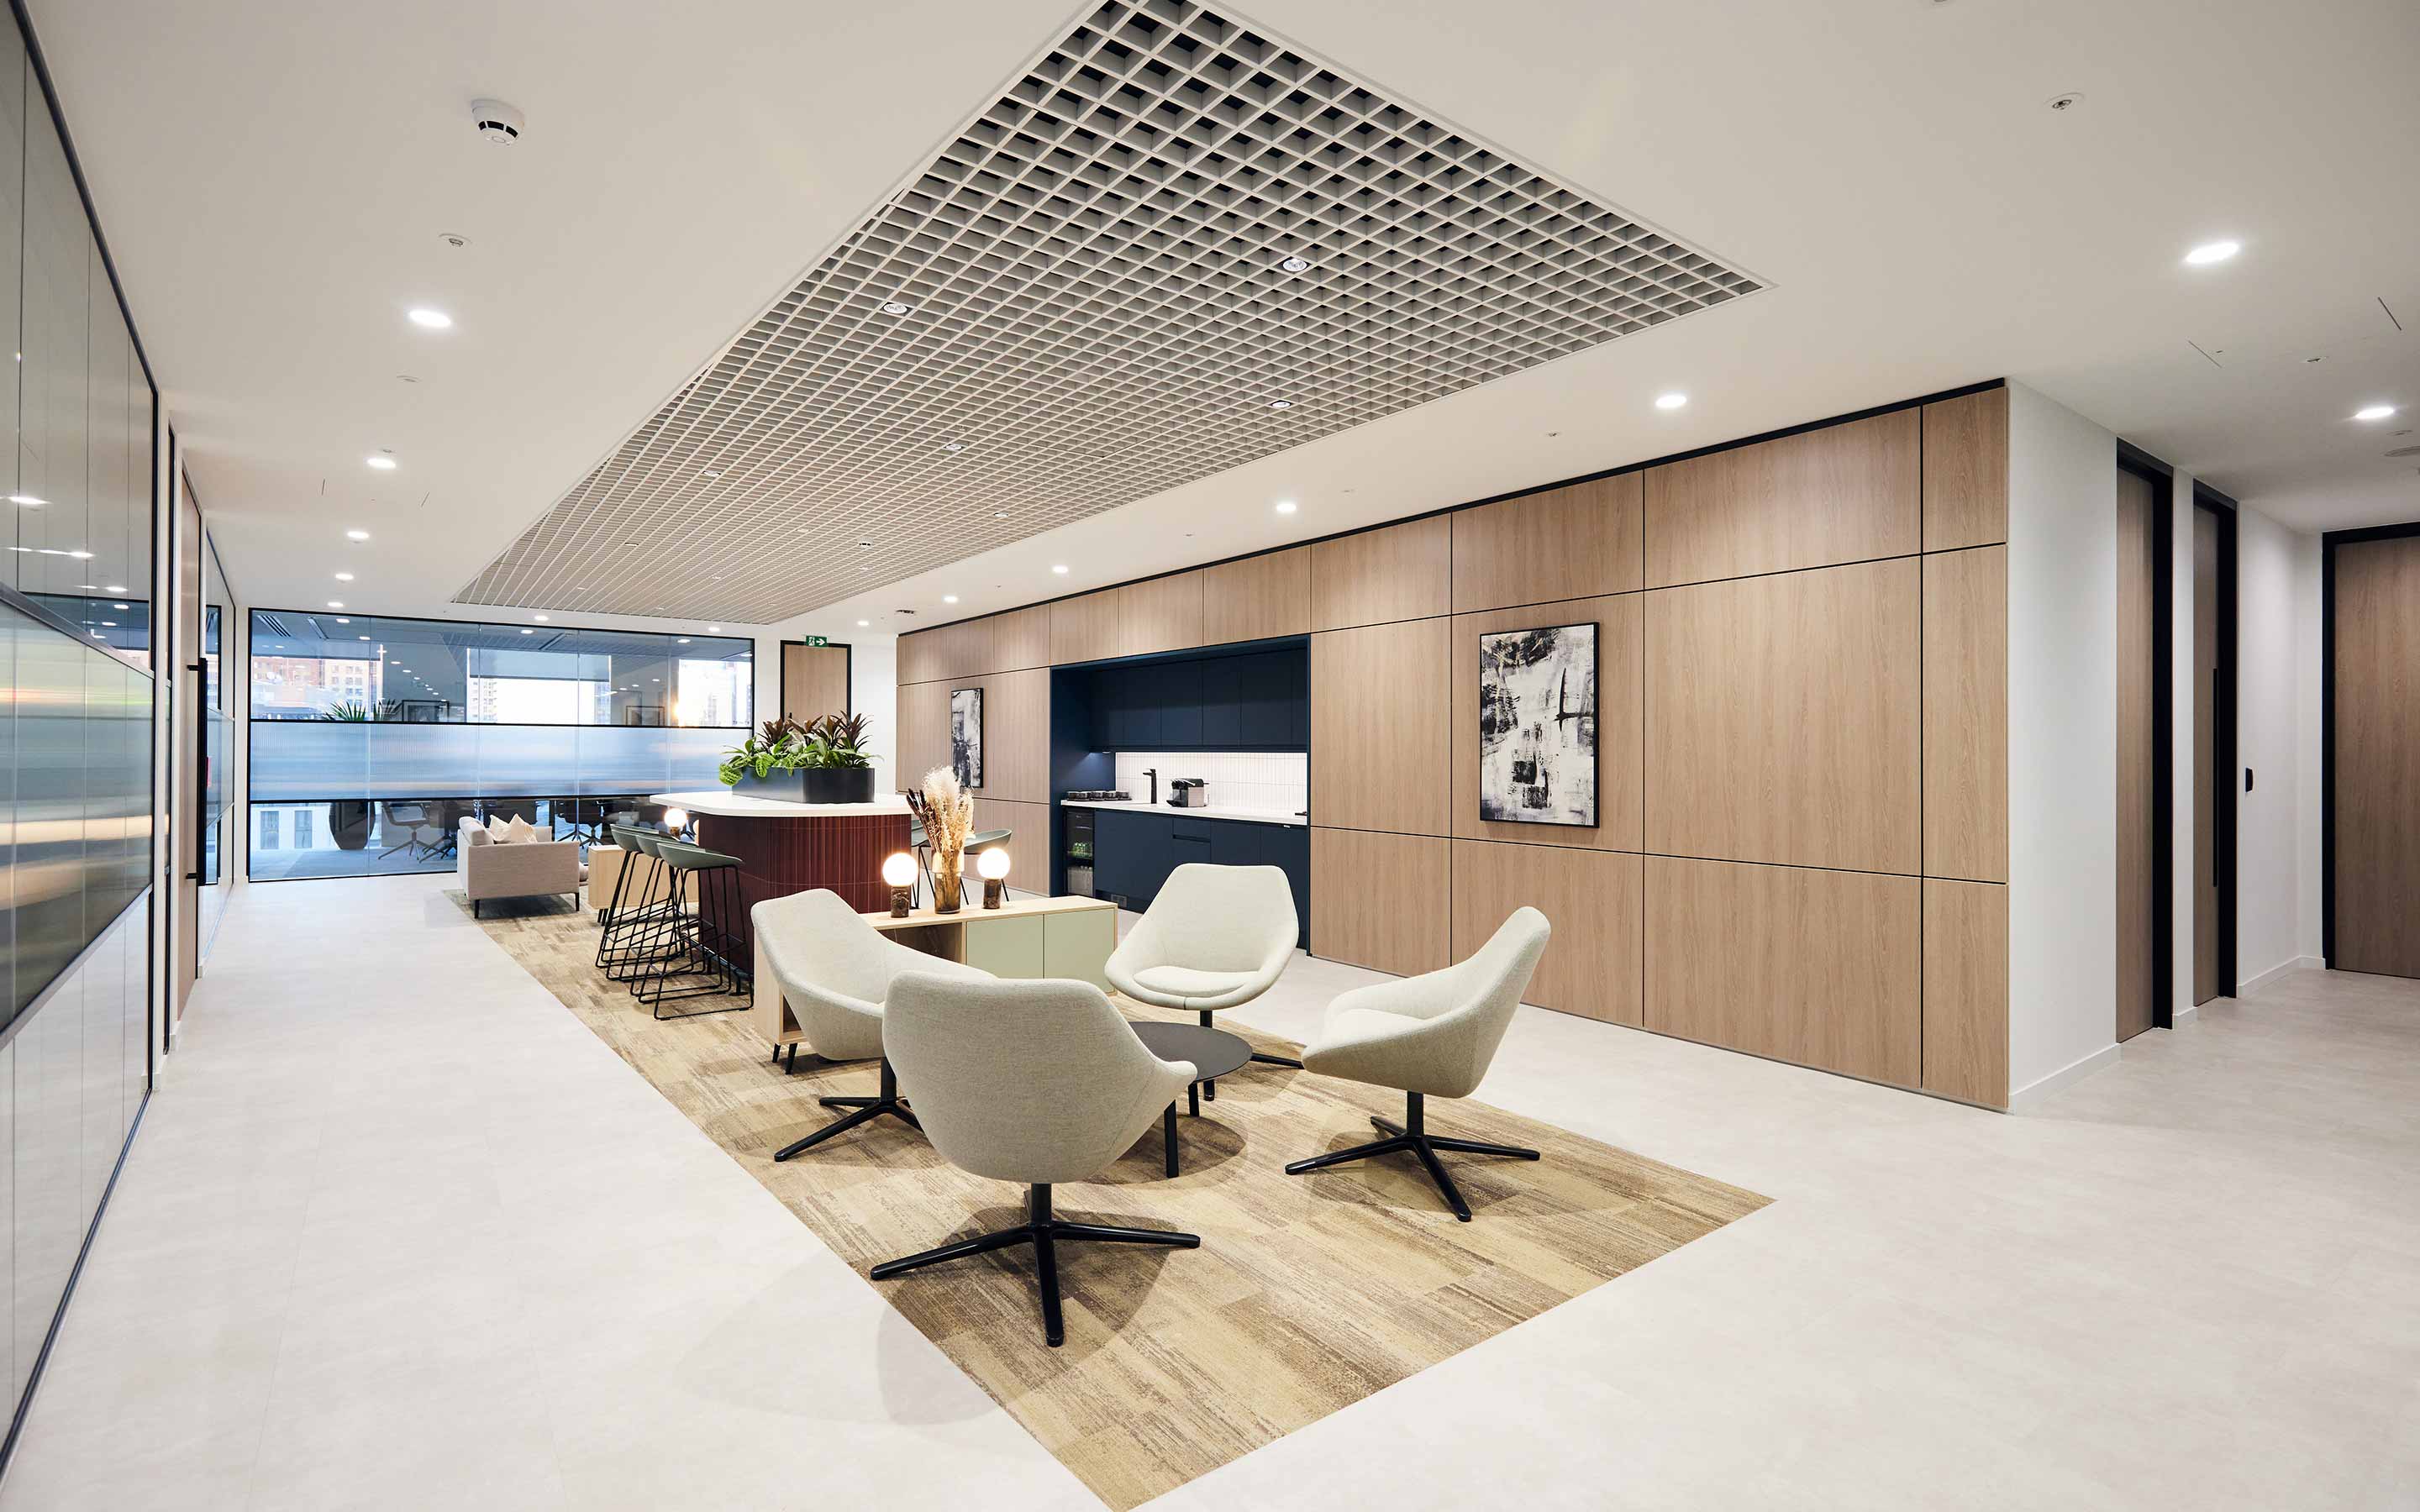 A luxurious office interior design showcasing a client waiting area for a financial services firm